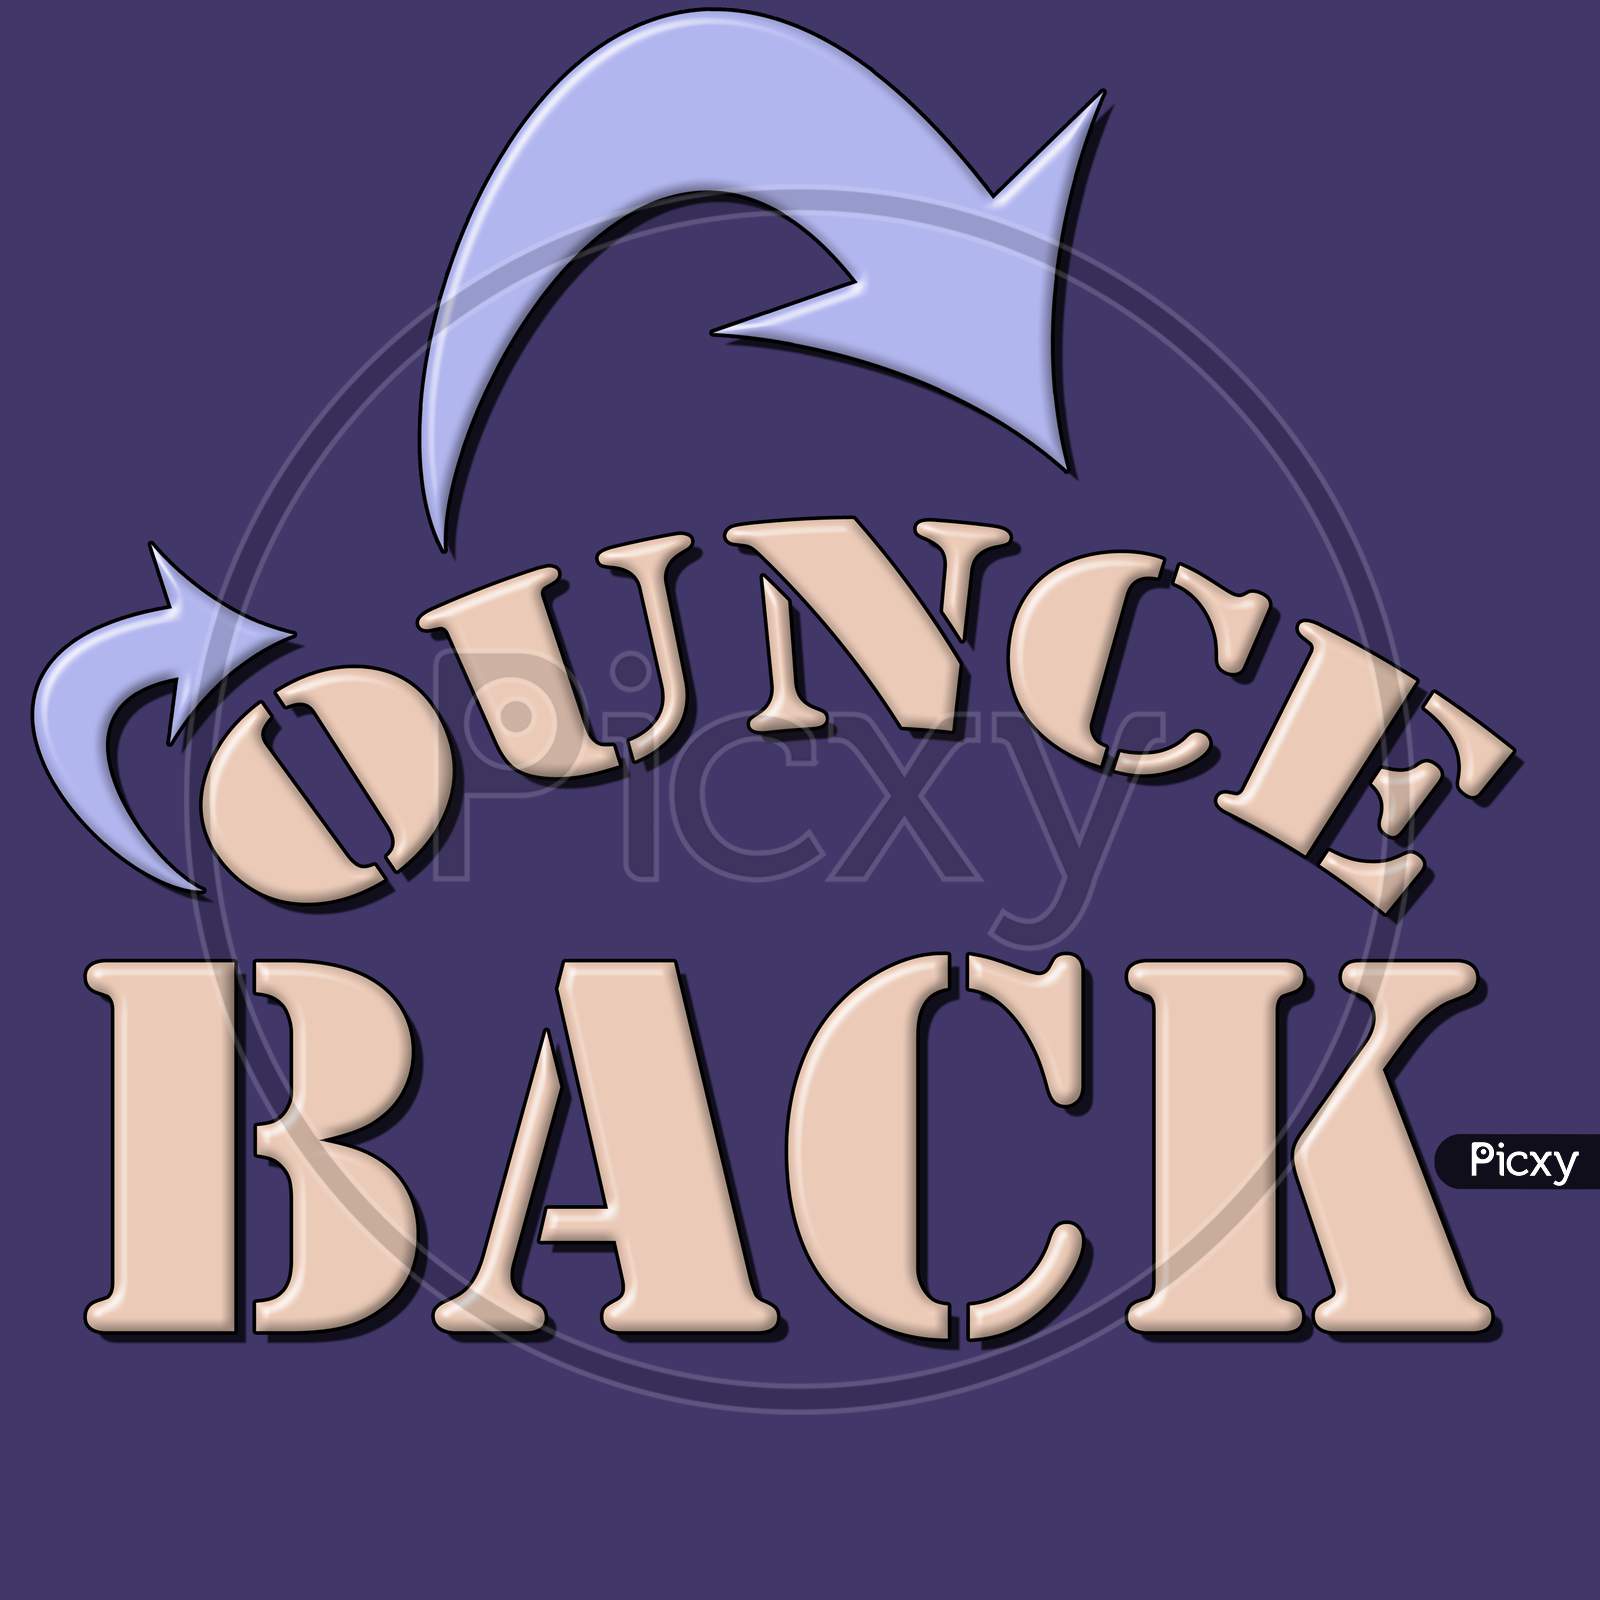 Bounce Back  Text And Textured Background